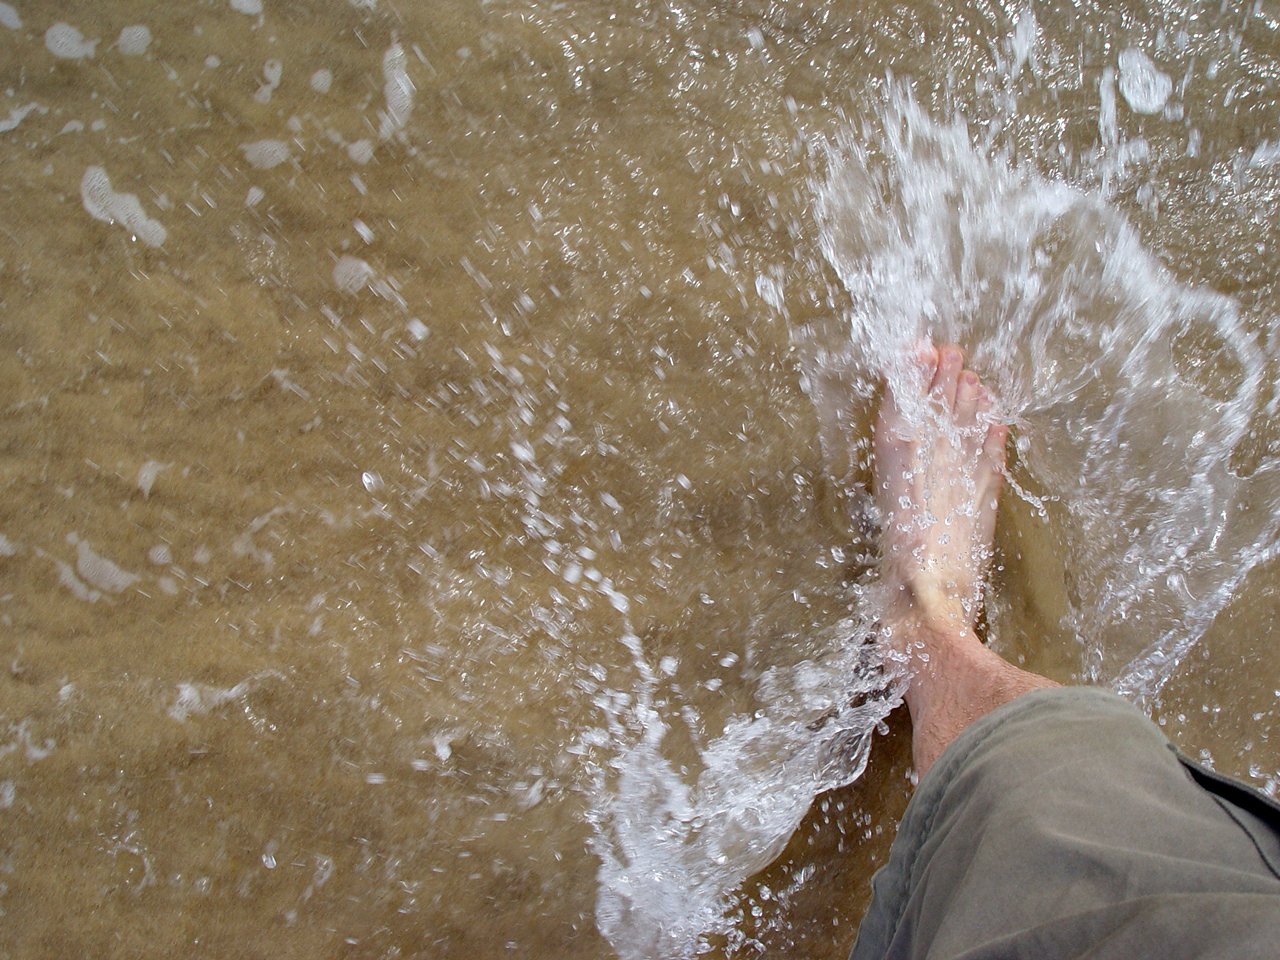 the feet and feet of a person who is on water